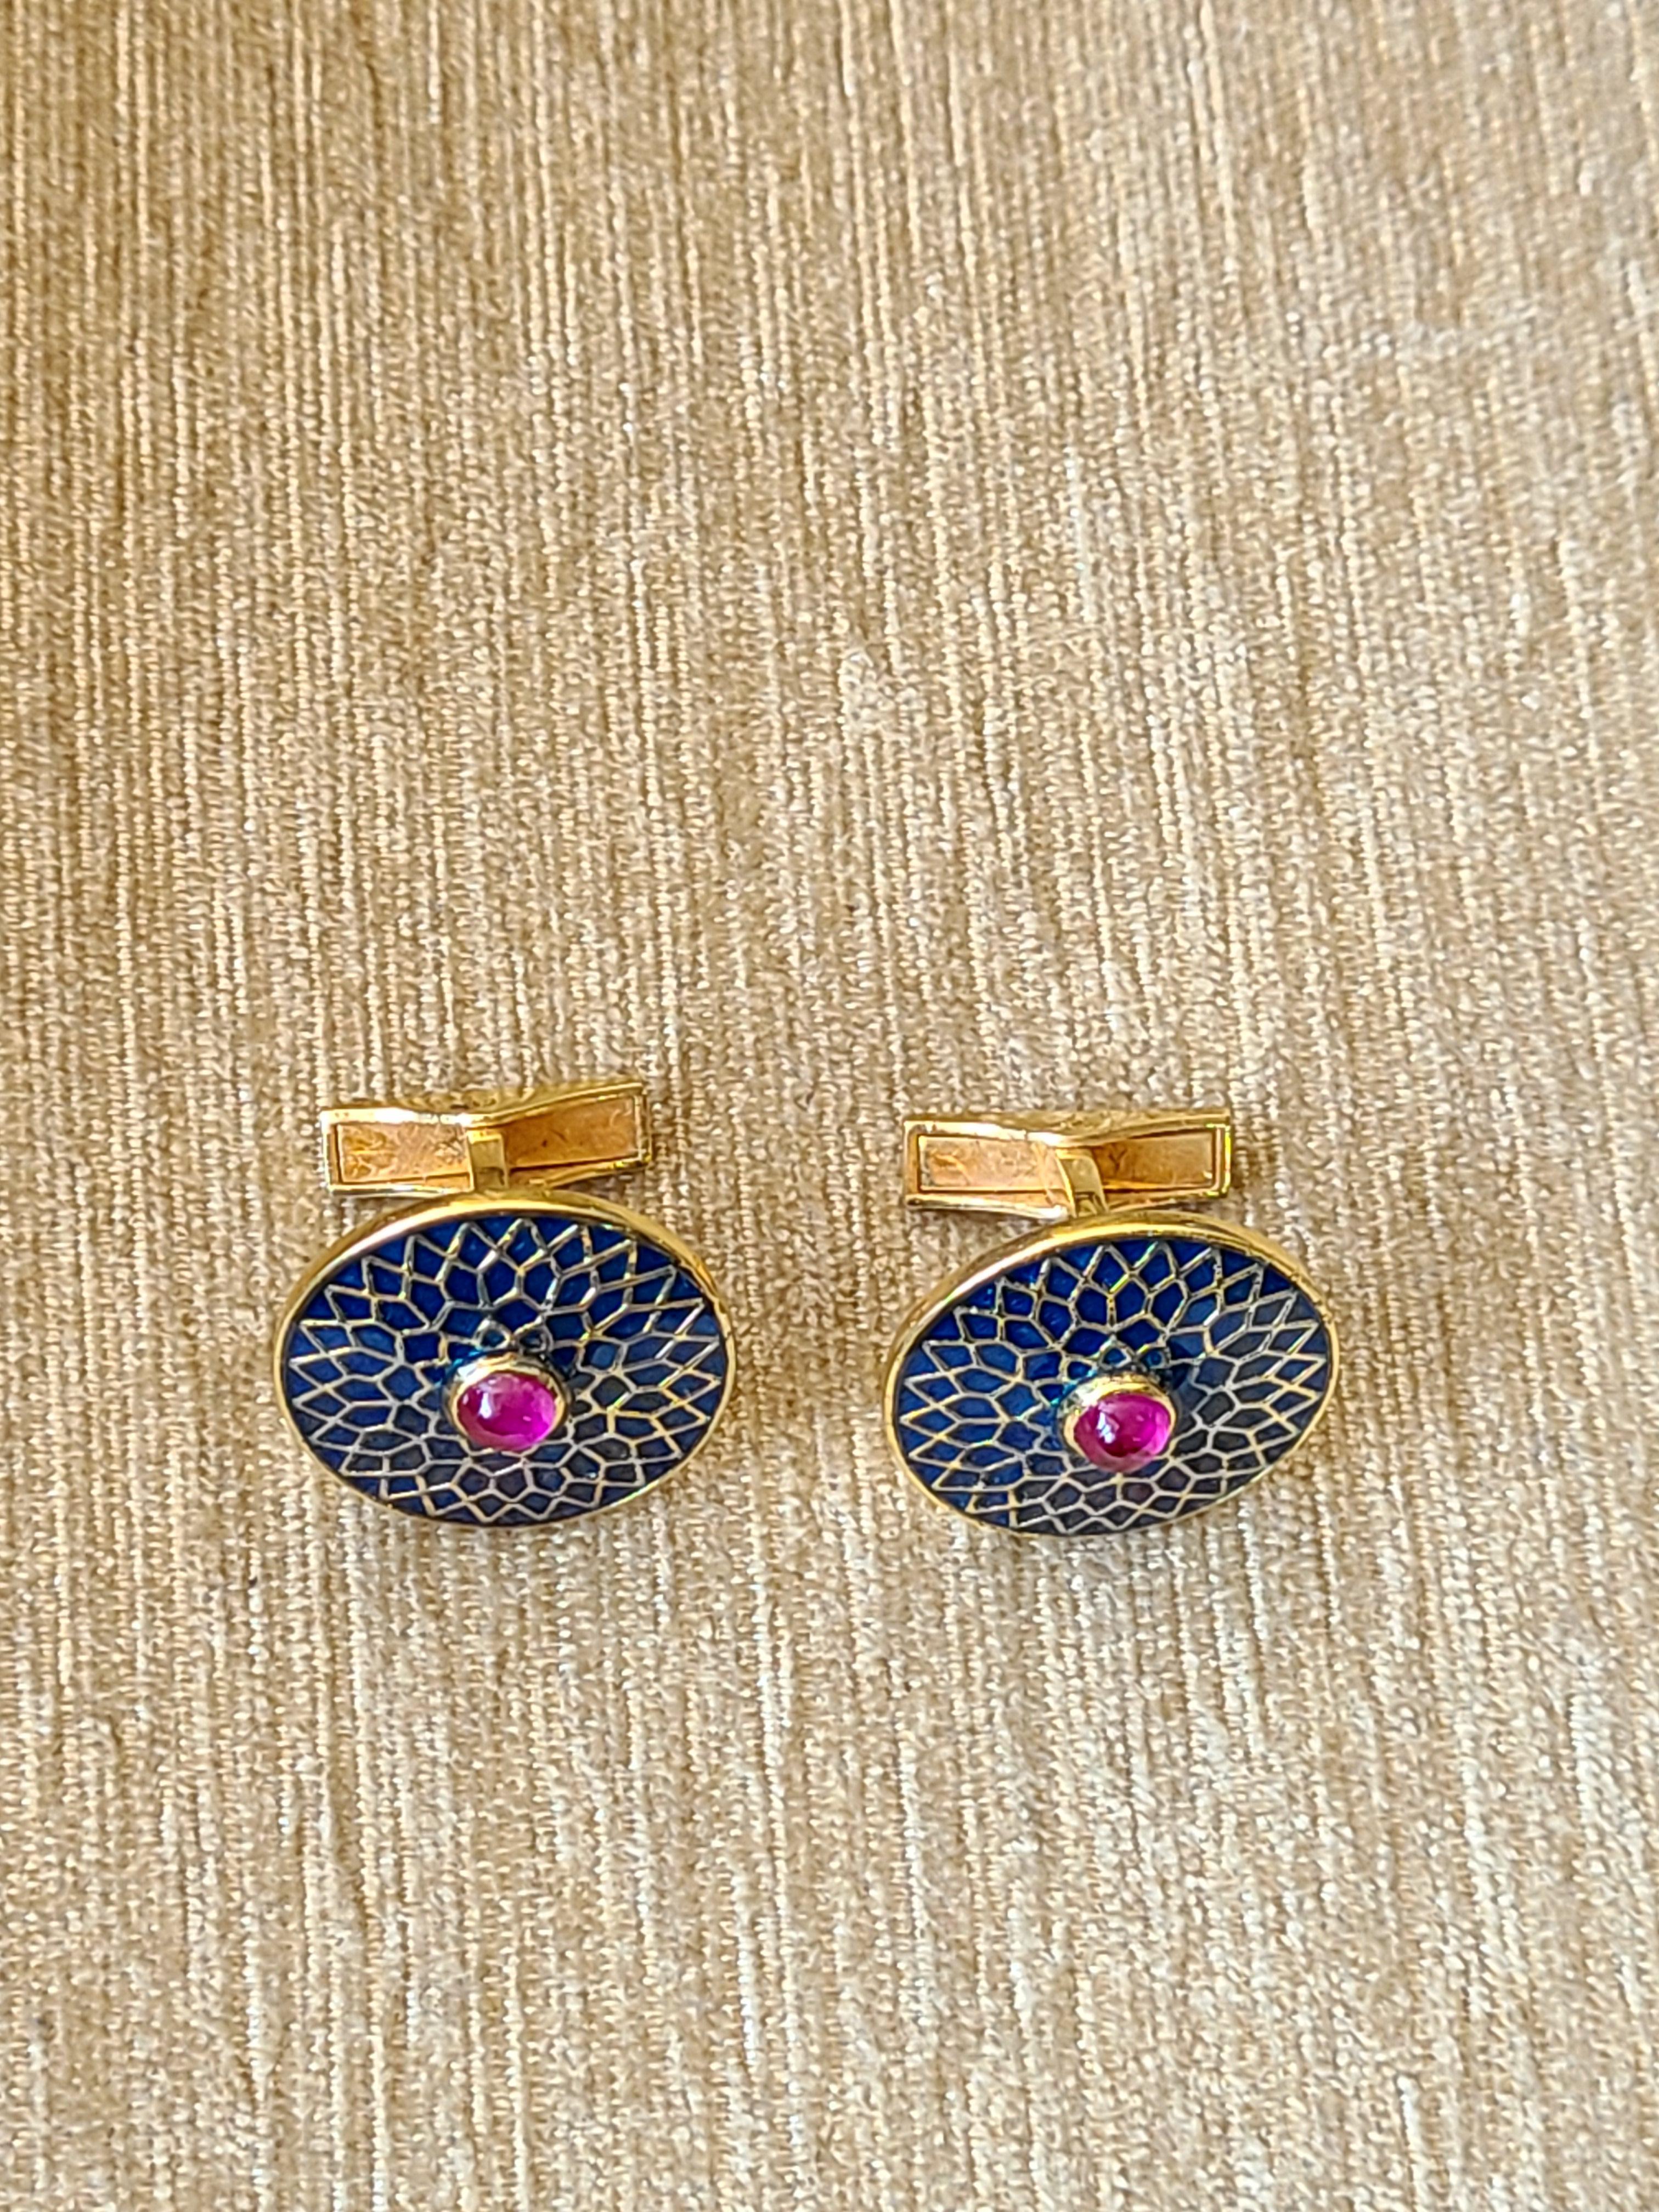 A gorgeous pair of cufflinks set with ruby in centre and finished with high quality blue and gold enamel made in 14k yellow gold. The net gold weight is 12.48 grams with ruby cabochon weight of .78 carats. The cufflinks dimension in cm 2 x 2.1 x 2.1